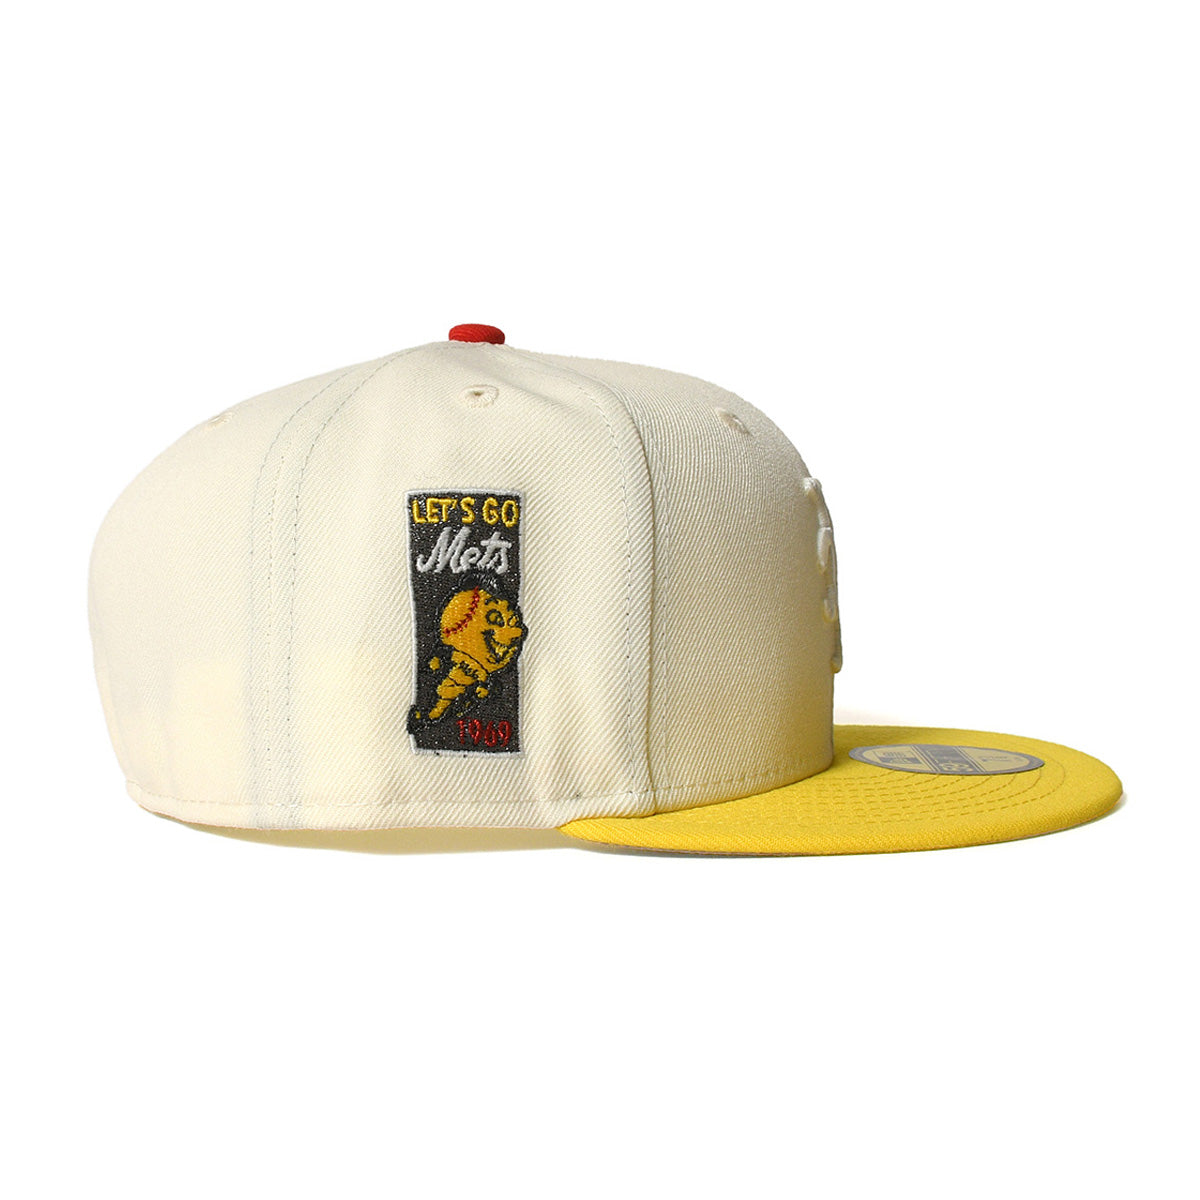 NEW ERA New York Mets - 59FIFTY 1969 LETS GO METS CHROME/CYBER YELLOW